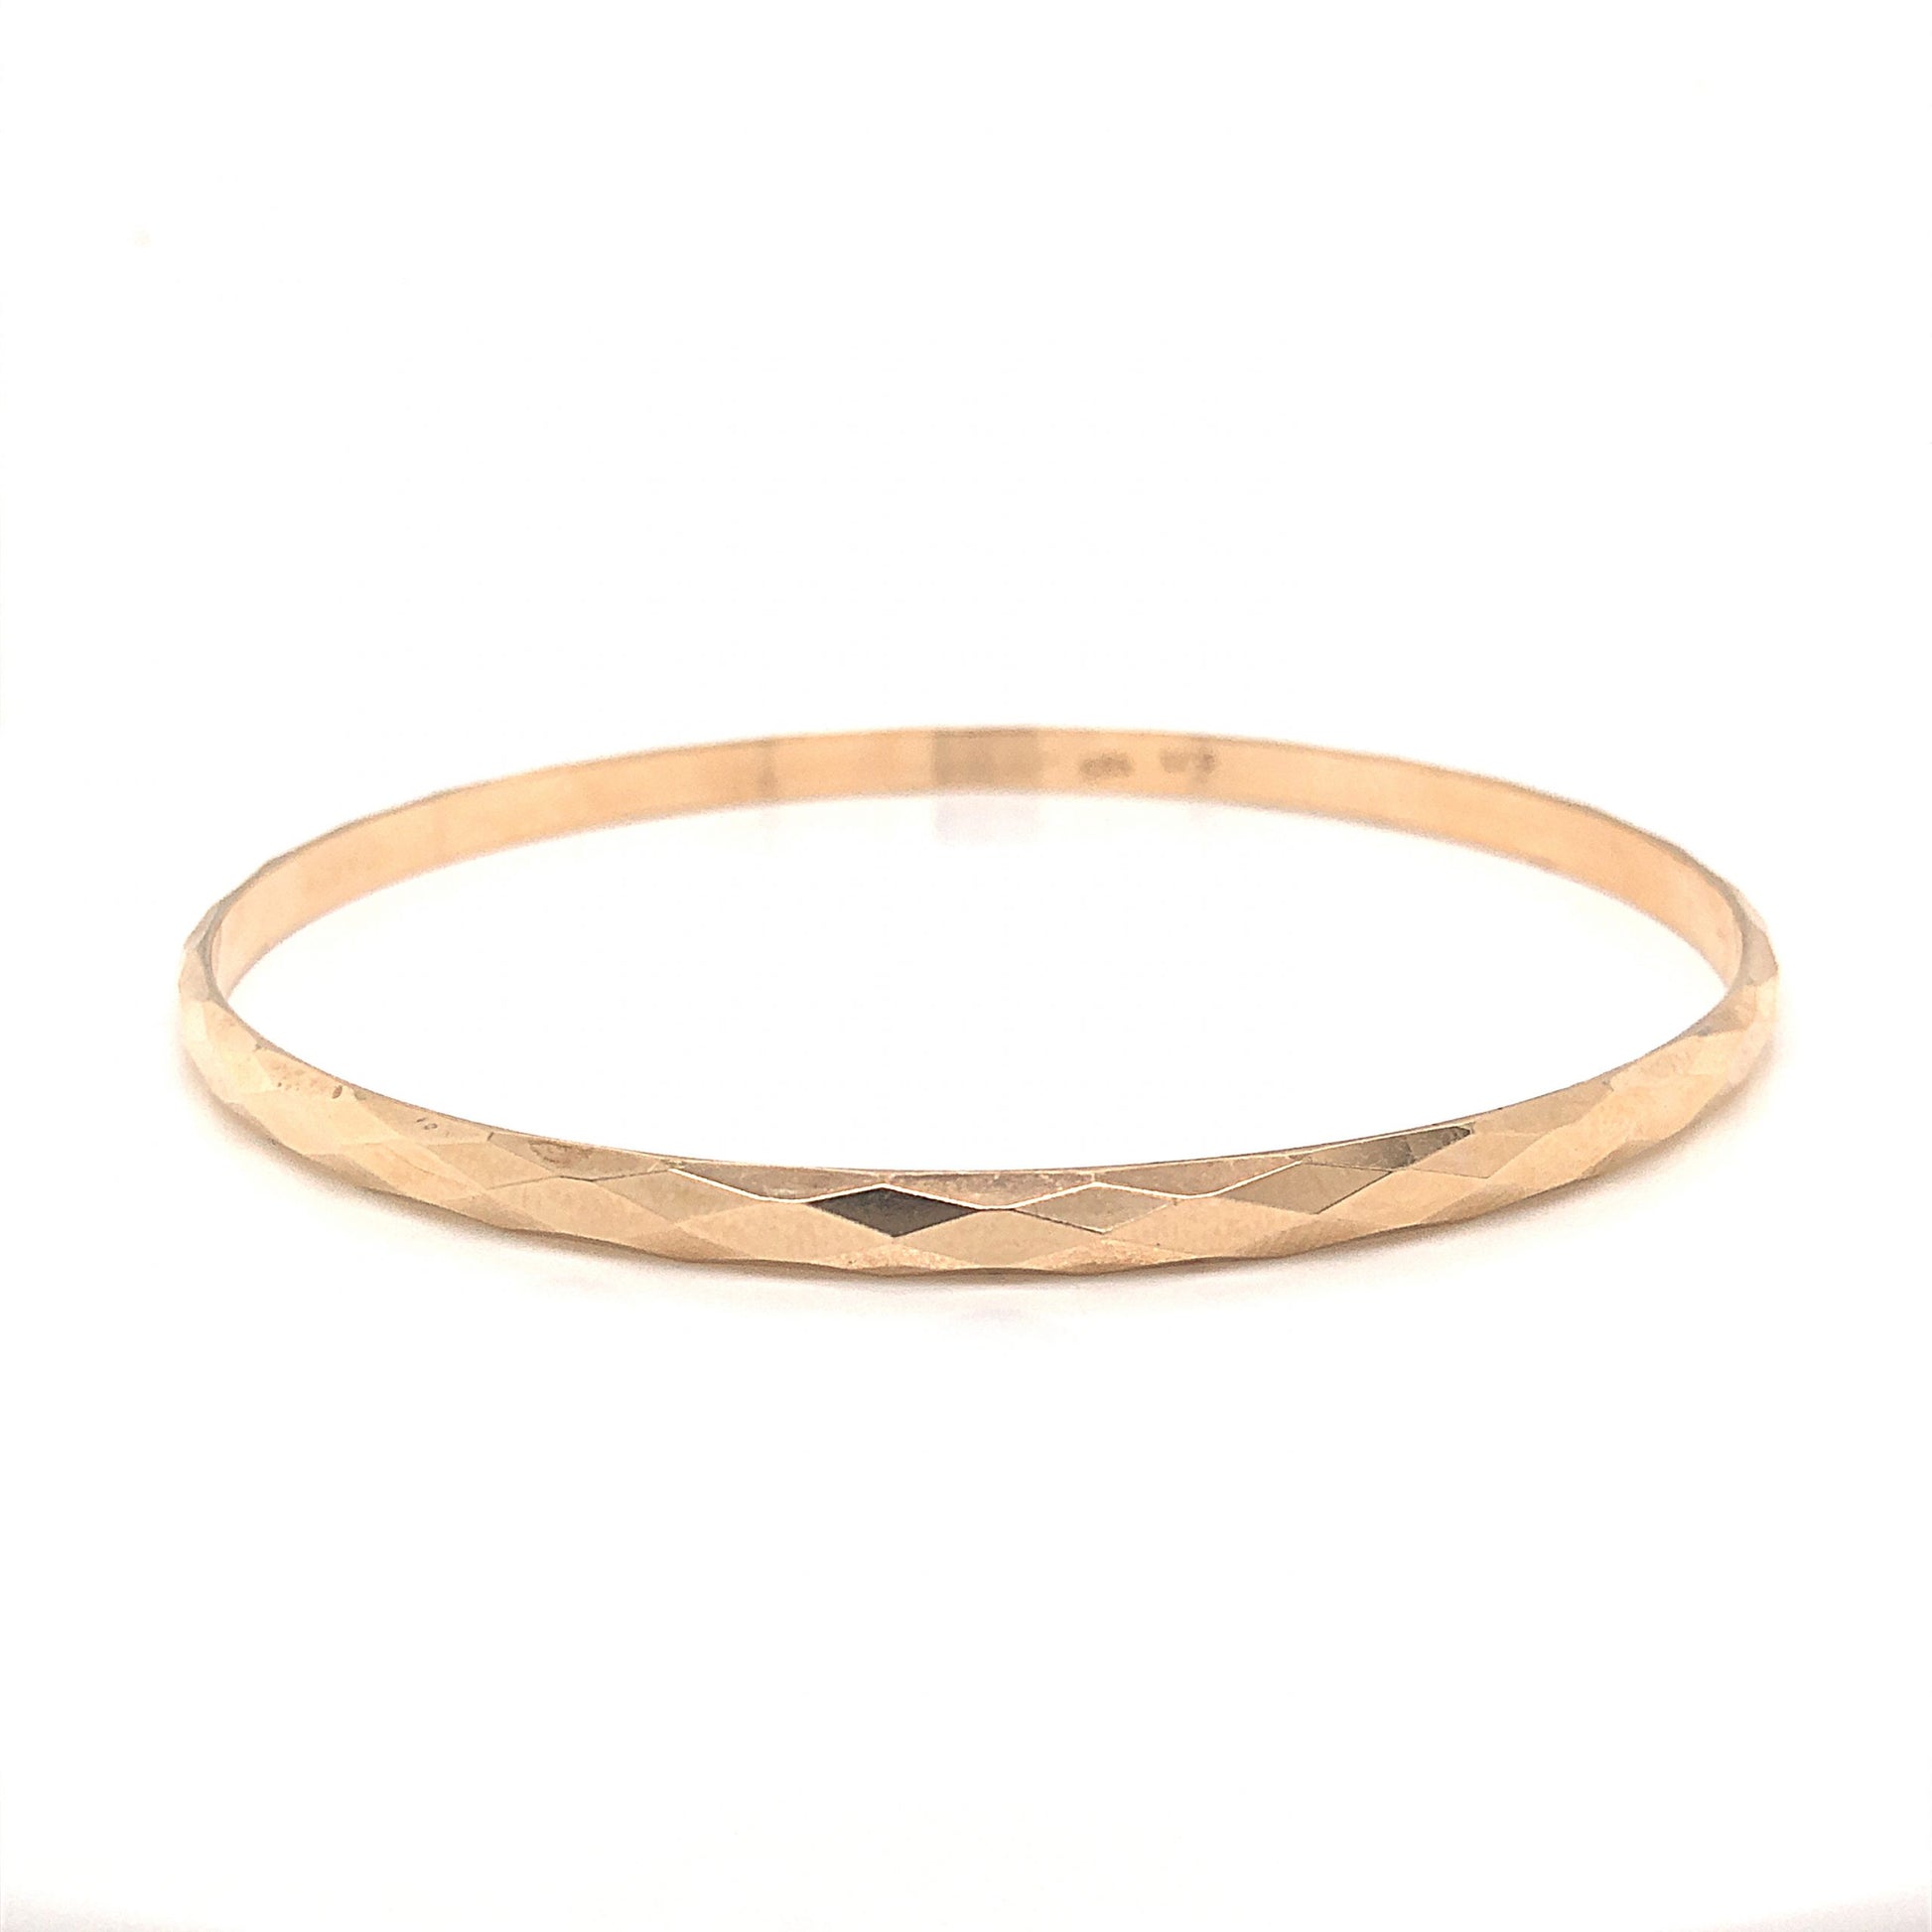 Faceted Bangle Bracelet in 14k Yellow GoldComposition: 14 Karat Yellow Gold Total Gram Weight: 6.1 g Inscription: 9.73 585
      